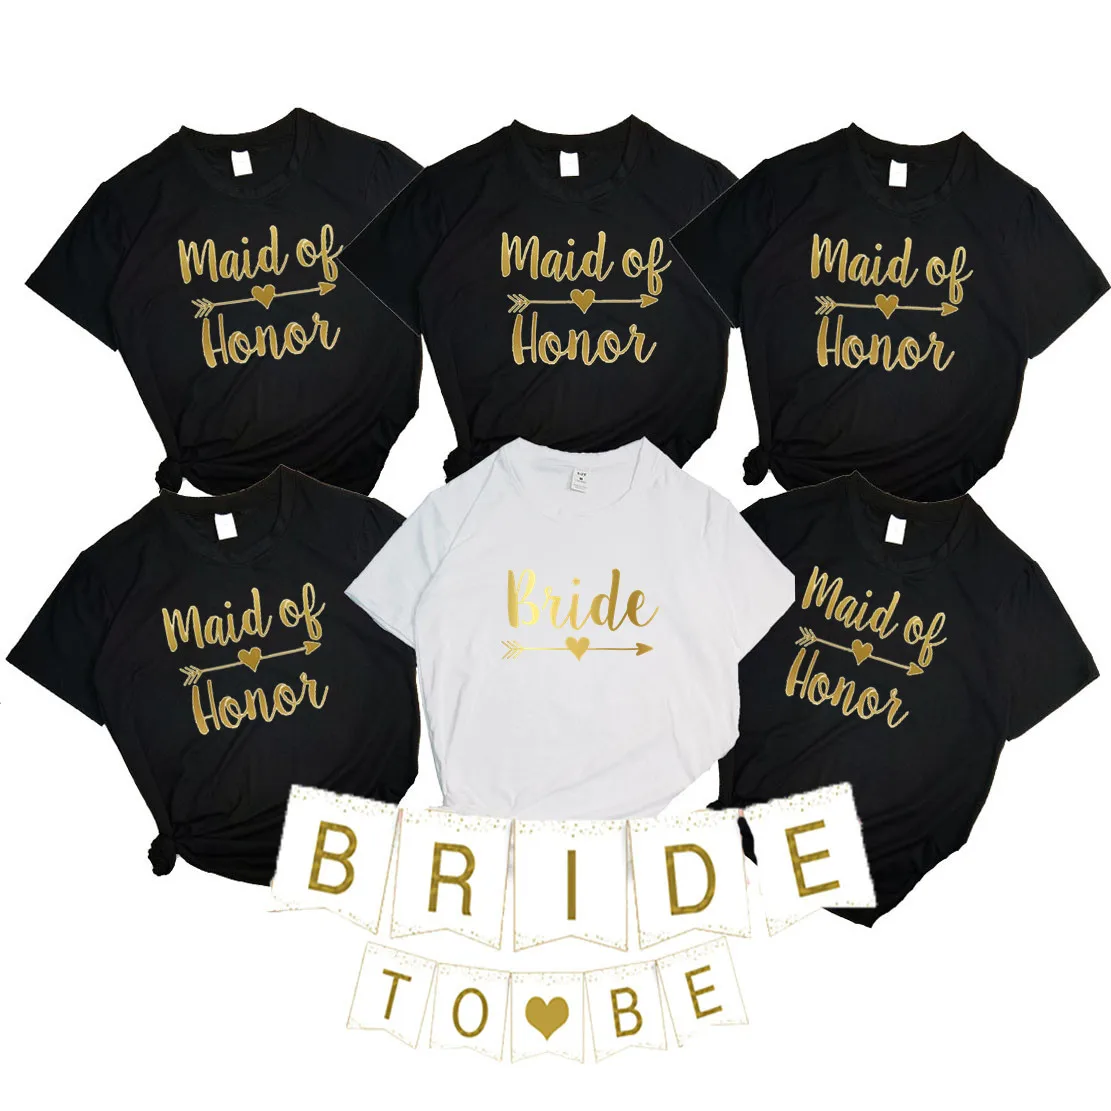 

Maid Of Honor Party Team Bride To Be Squad Bachelorette T-shirts Girl vfj Hen Party Tops Tee Lady Birde To Be Clothes